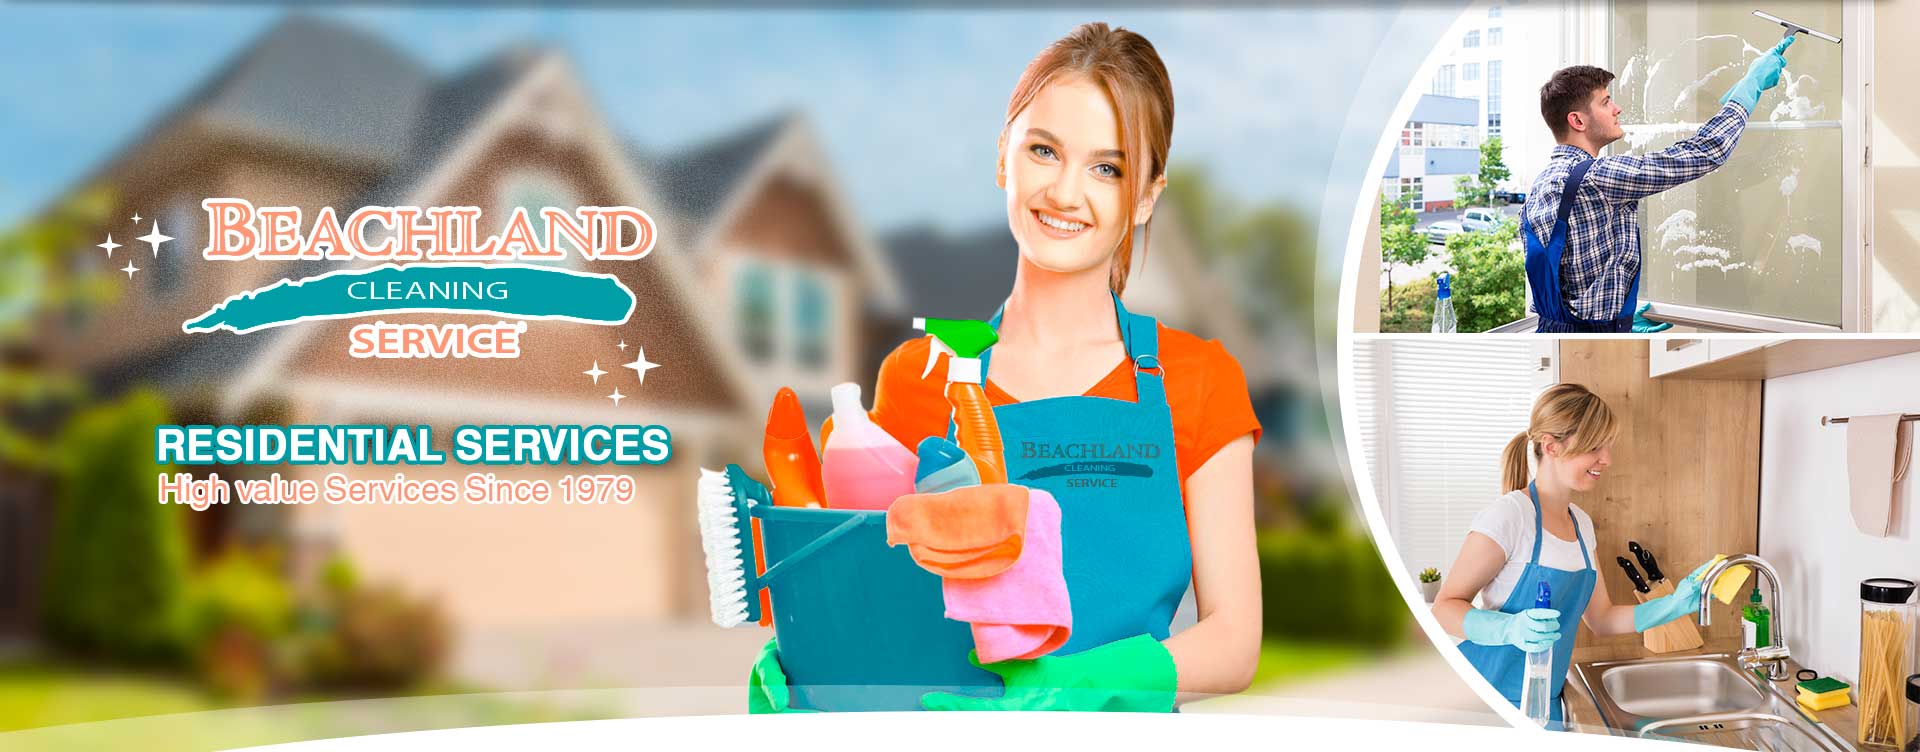 Office Cleaning Services in Palm Beach County